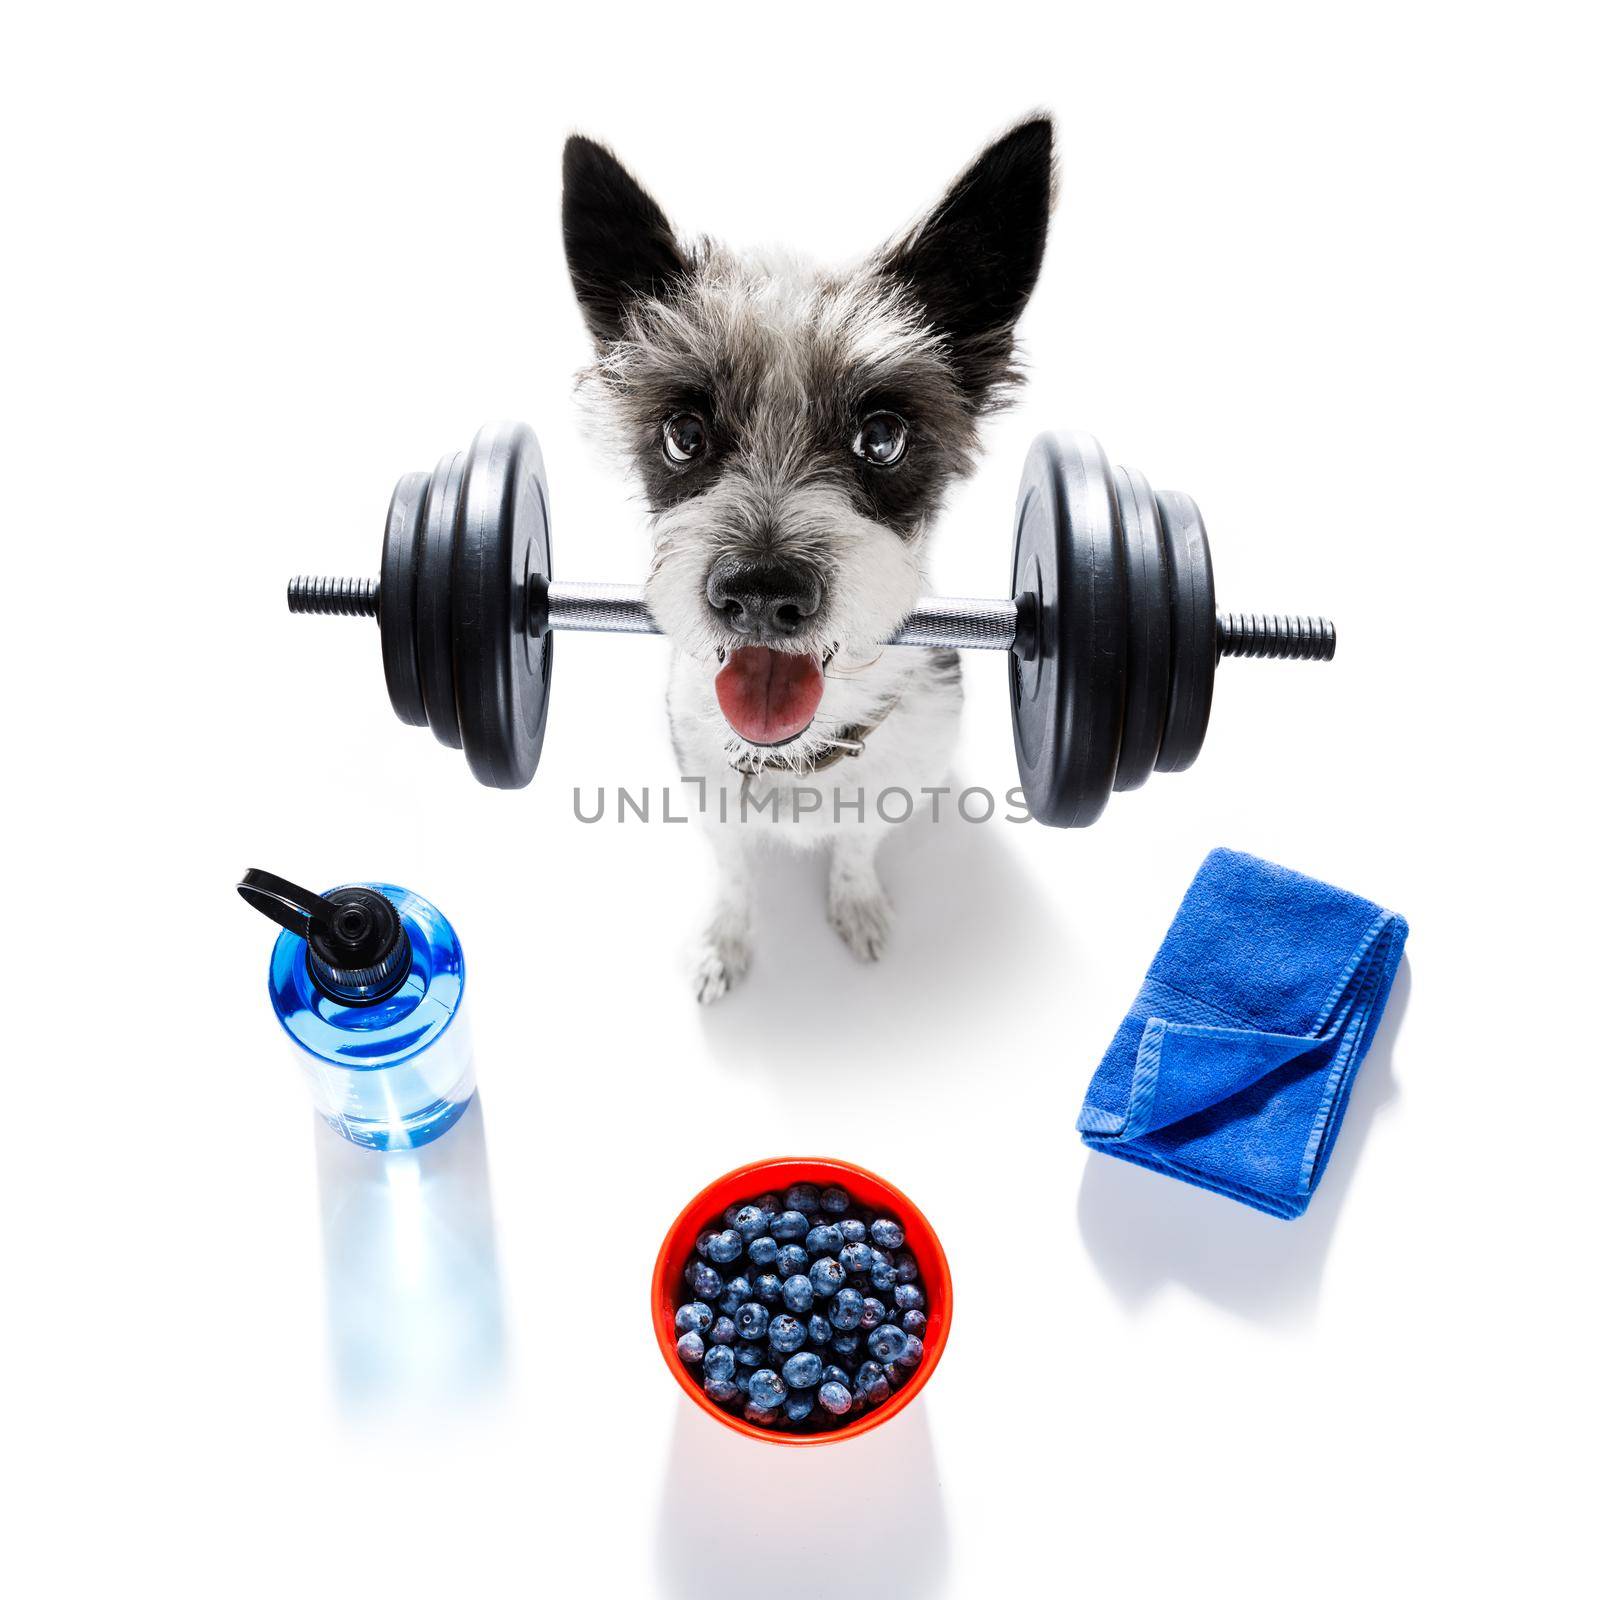 fitness poodle dog lifting a heavy dumbbell, as personal trainer , isolated on white background with healthy food or fruit